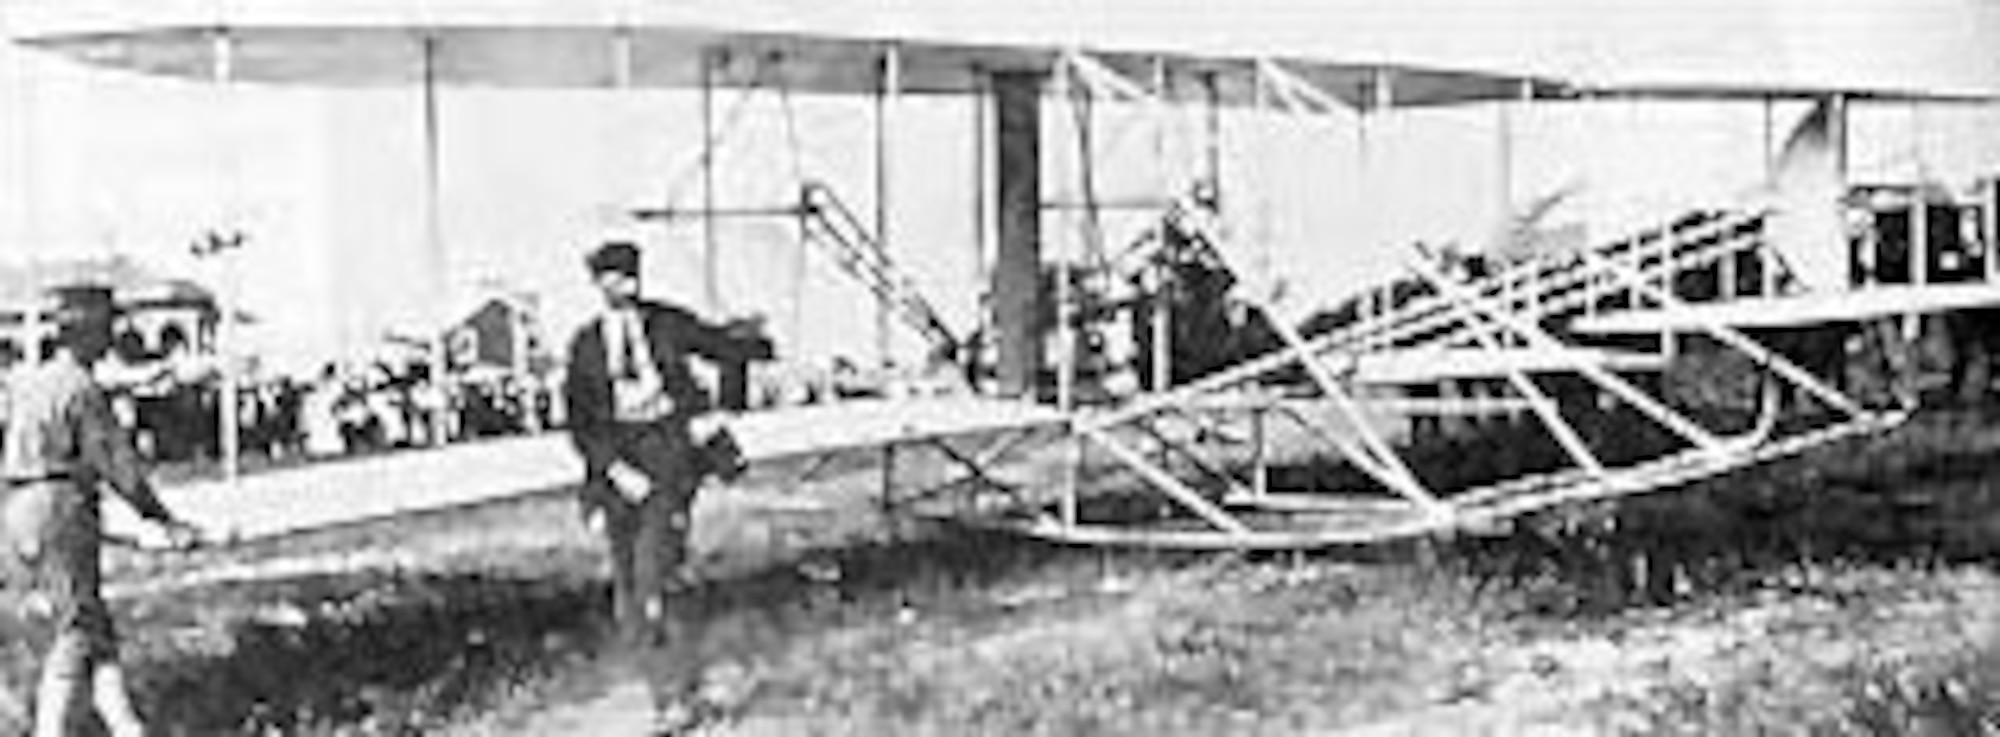 Orville Wright prepares to take-off in the 1908 Flyer with Maj. George O. Squier as passenger, Sept. 12, 1908. (U.S. Air Force photo)